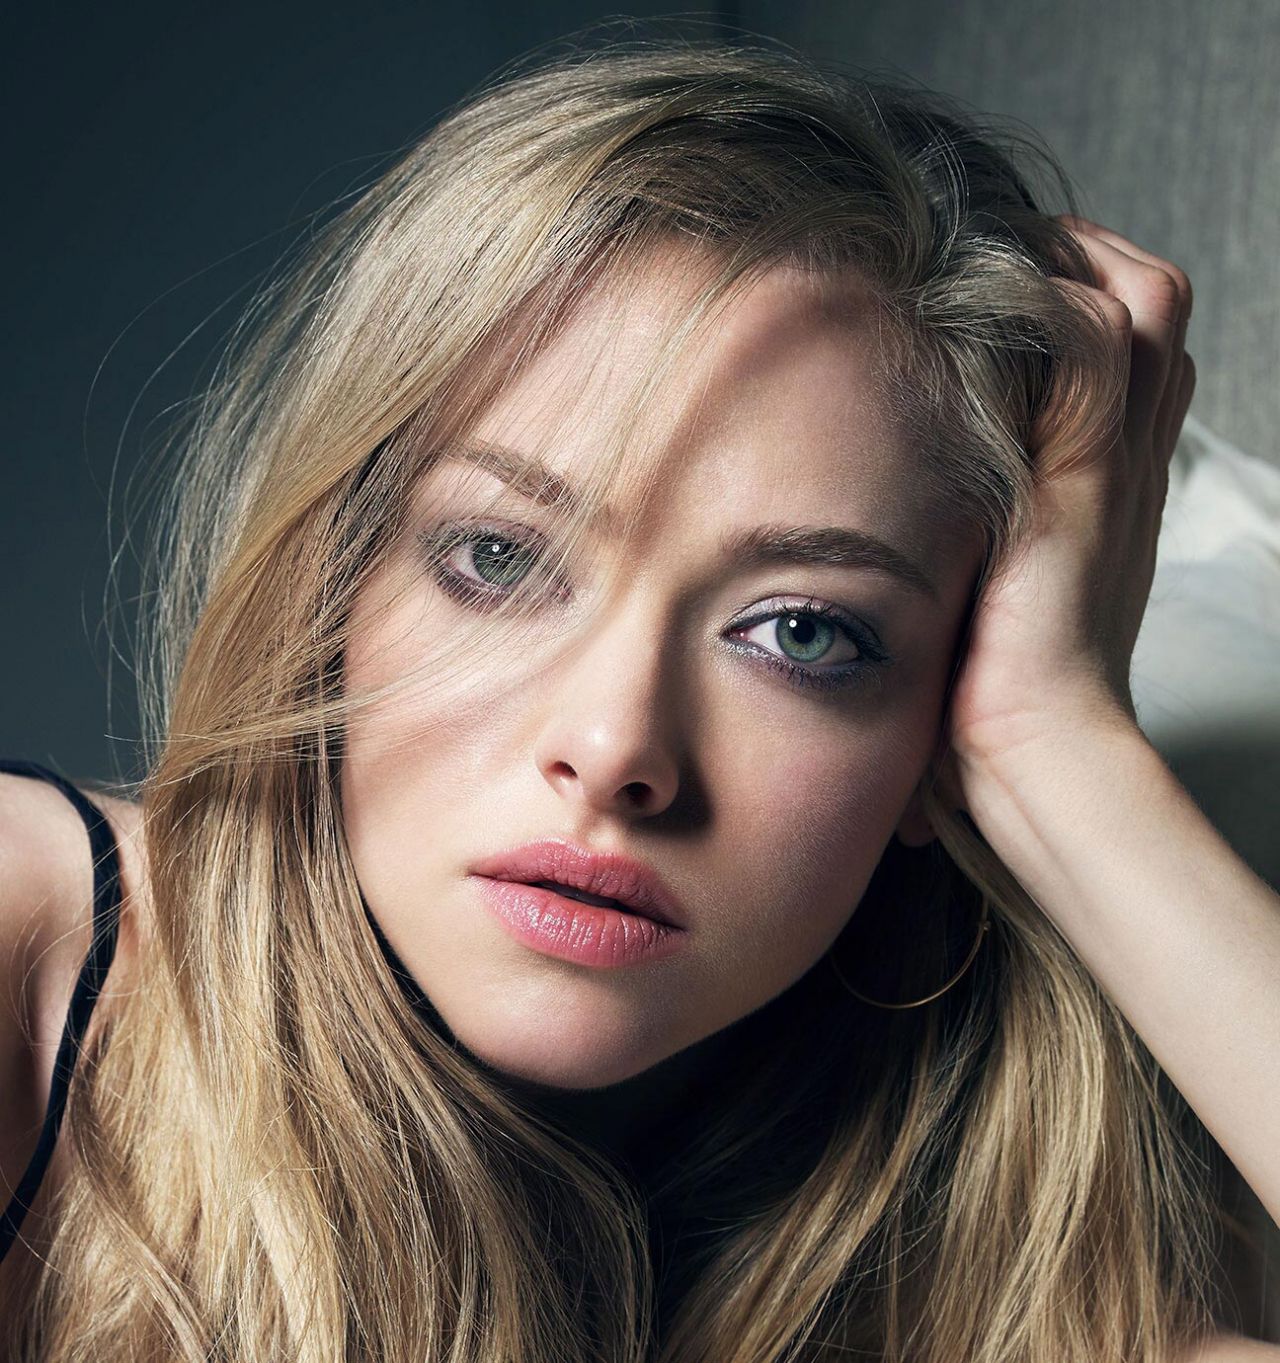 All 104+ Images latest photos of amanda seyfried Excellent